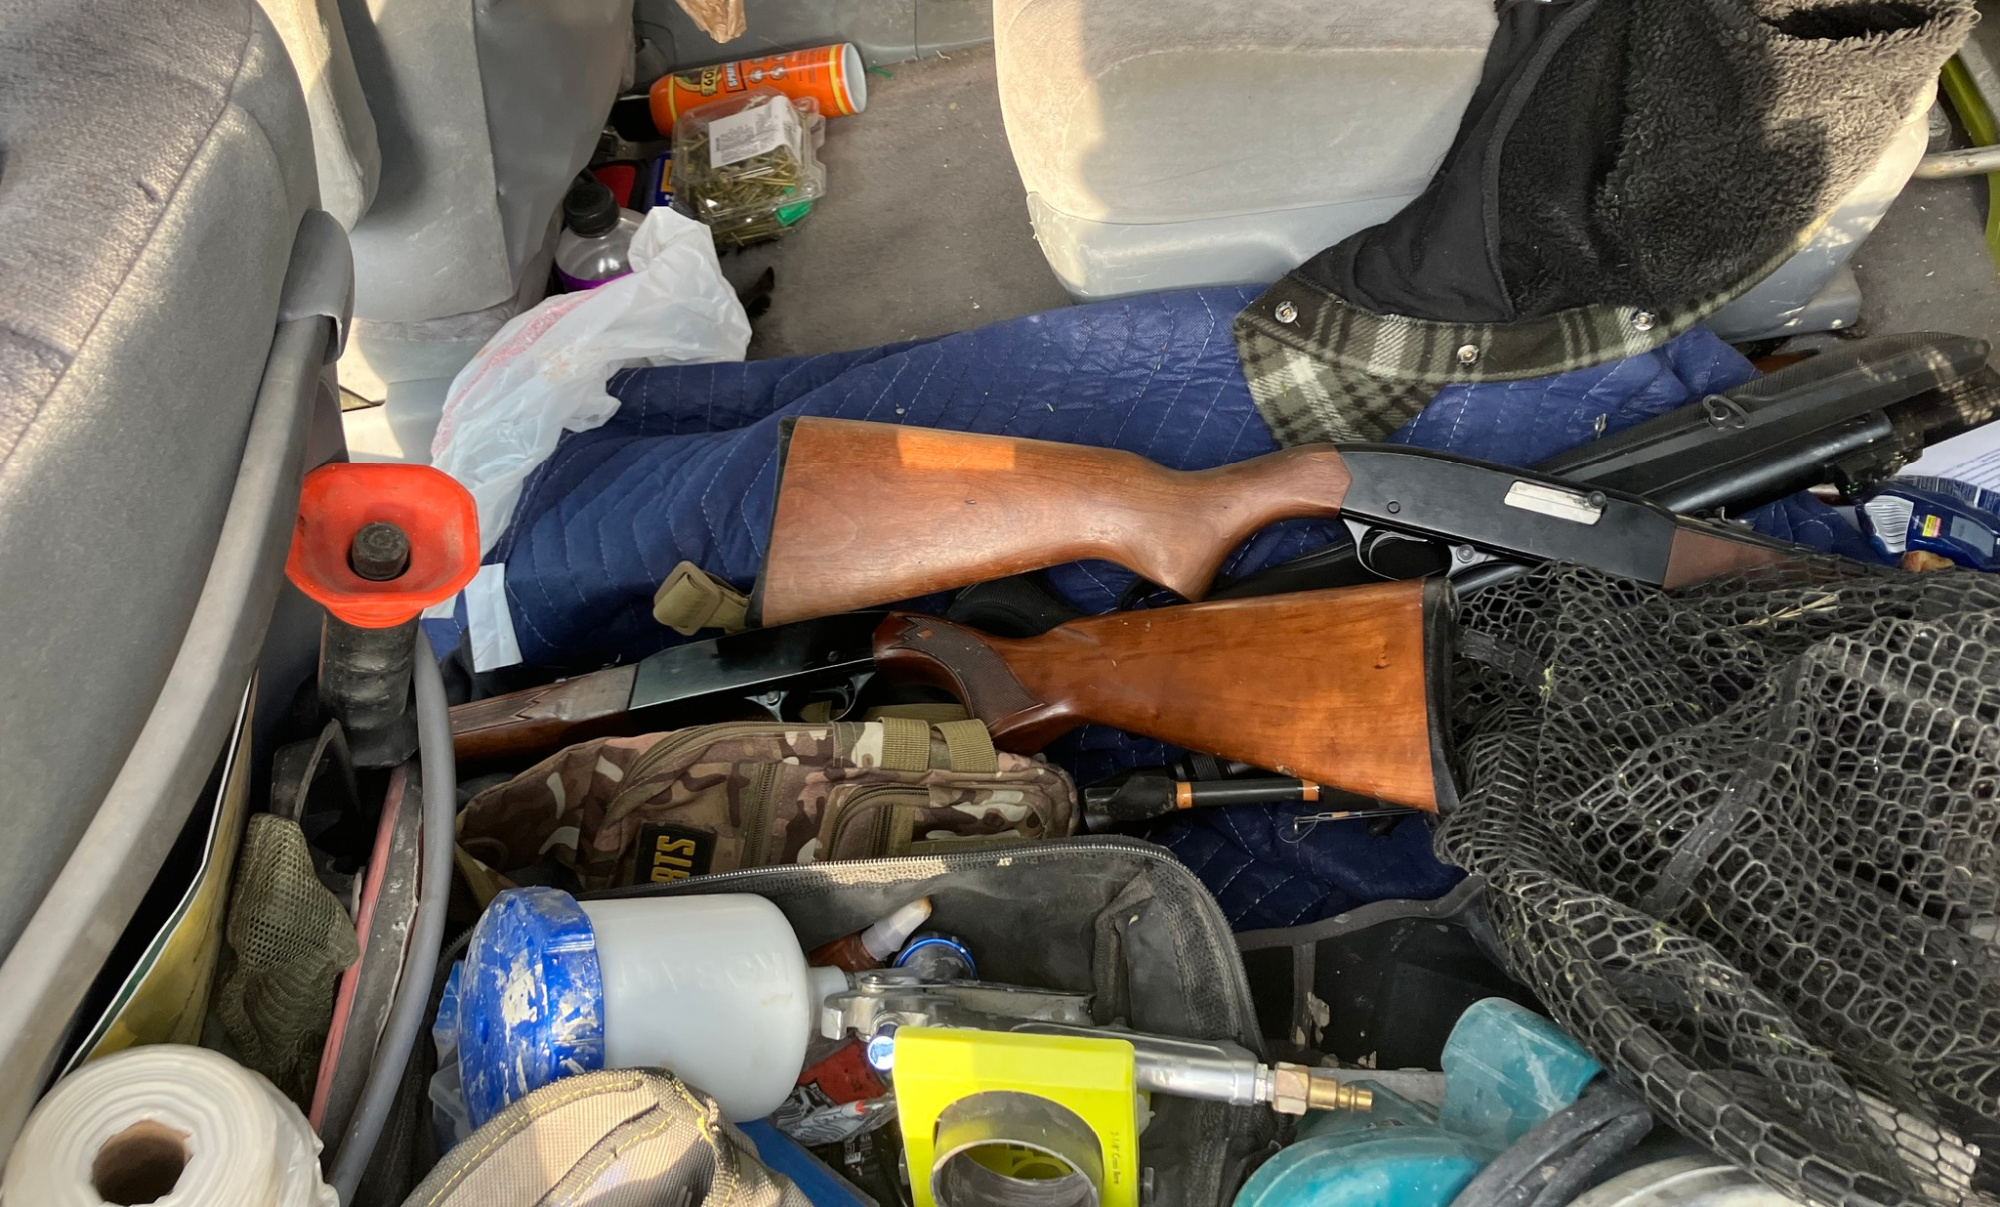 A pile of tools and guns inside a messy vehicle.